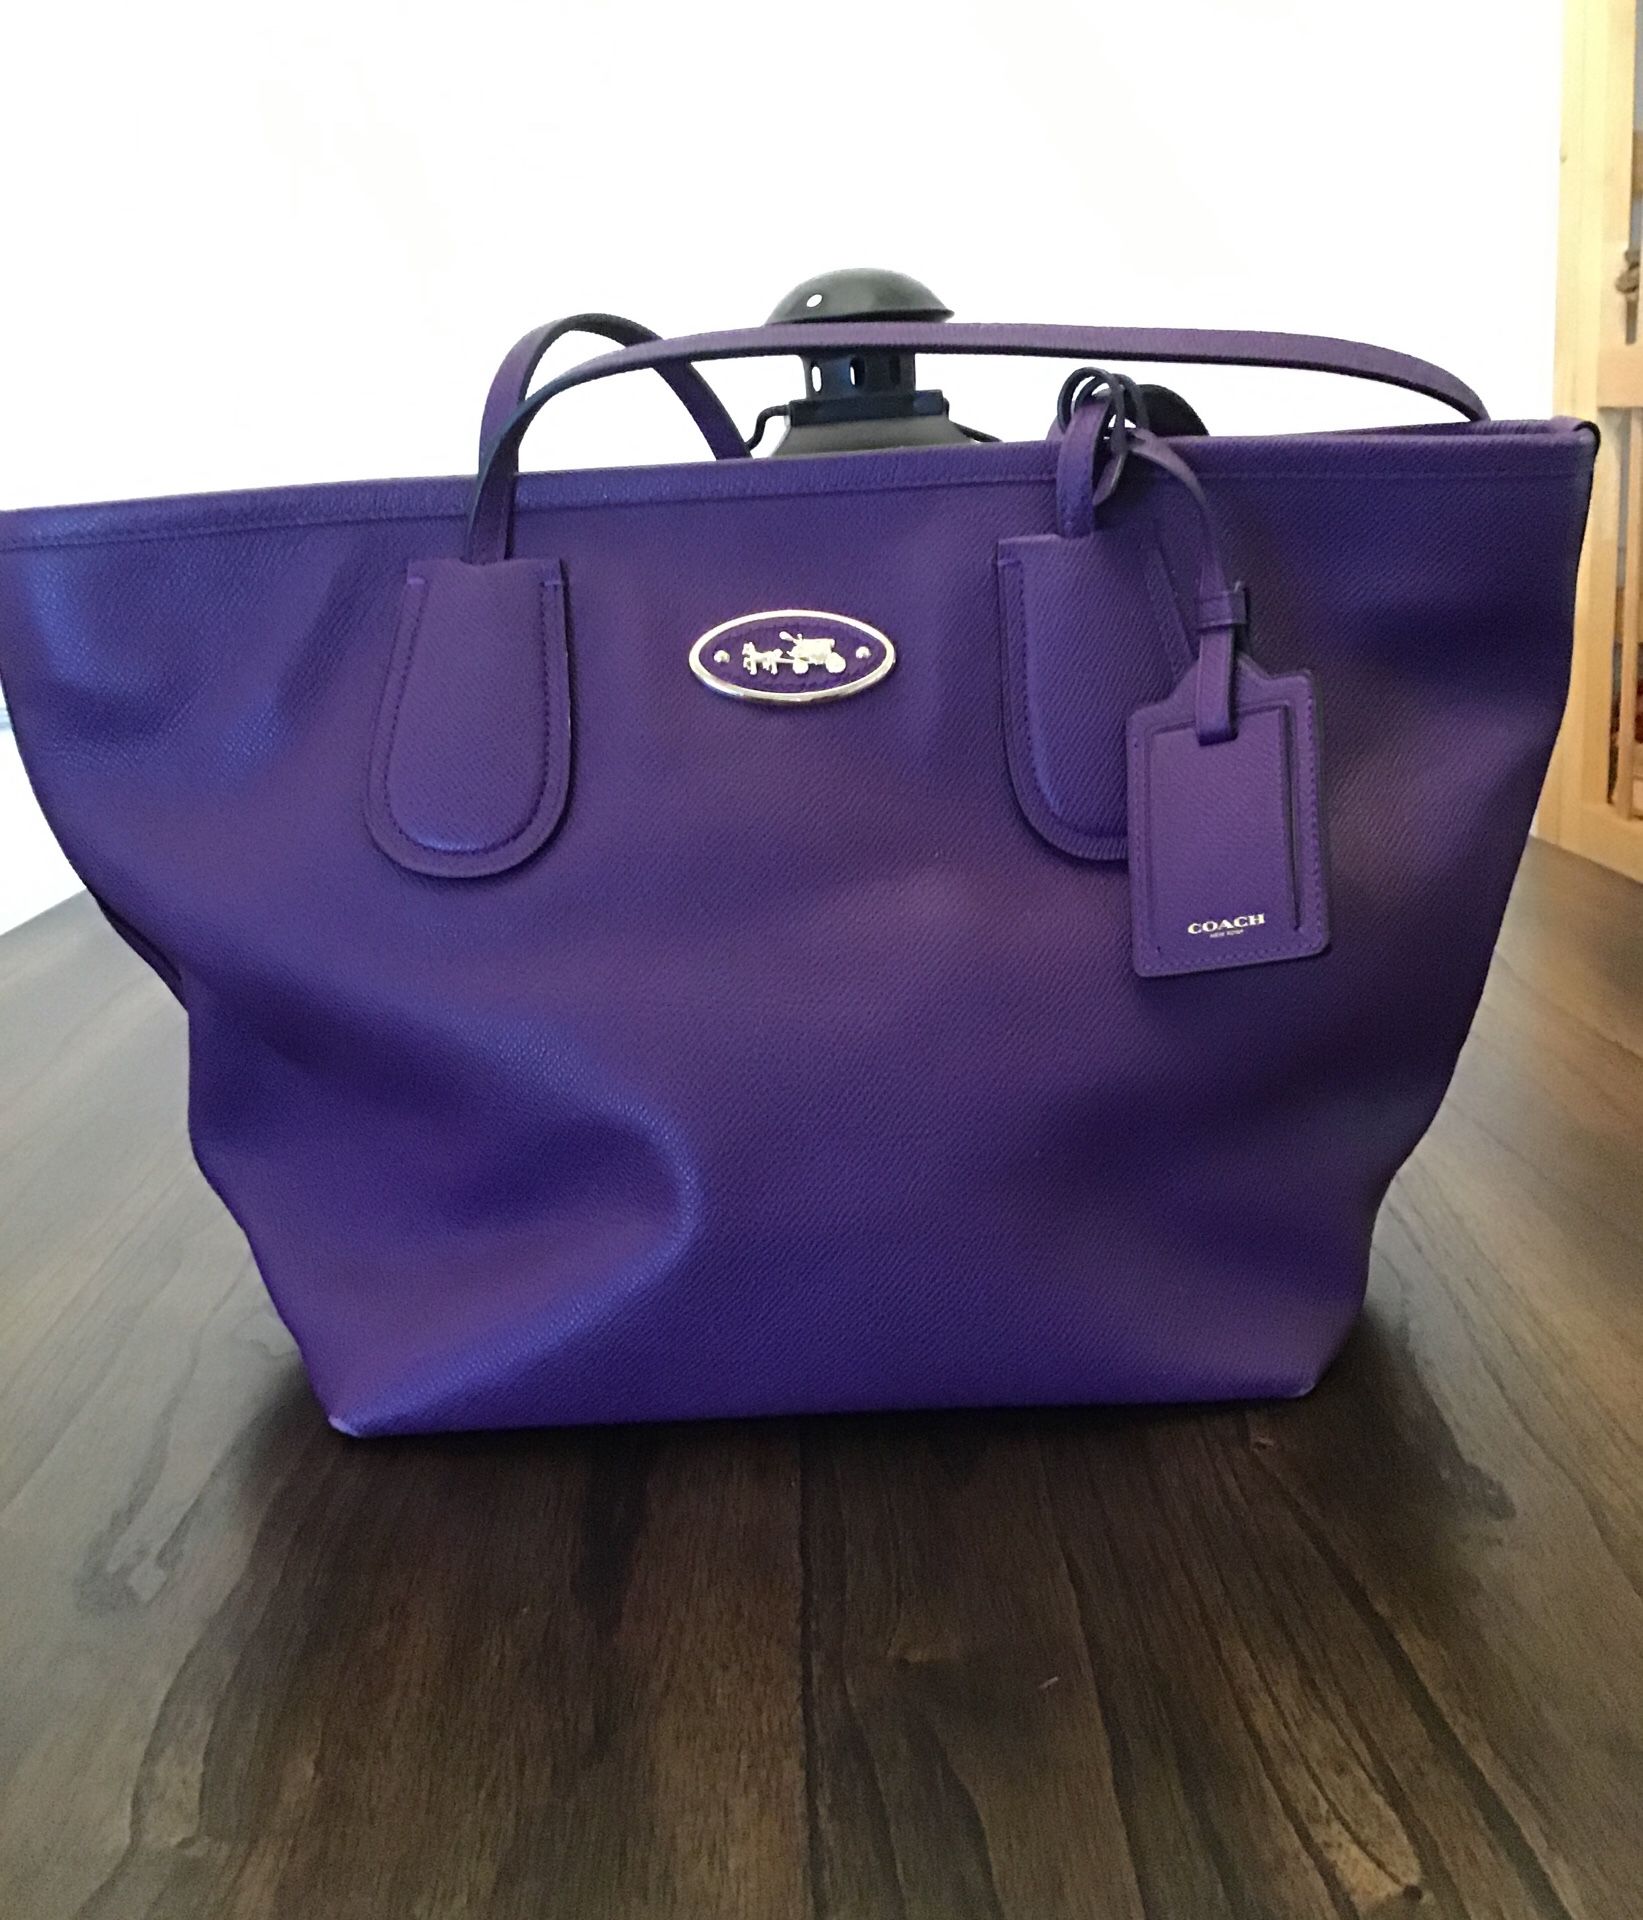 Coach purple tote bag gently used